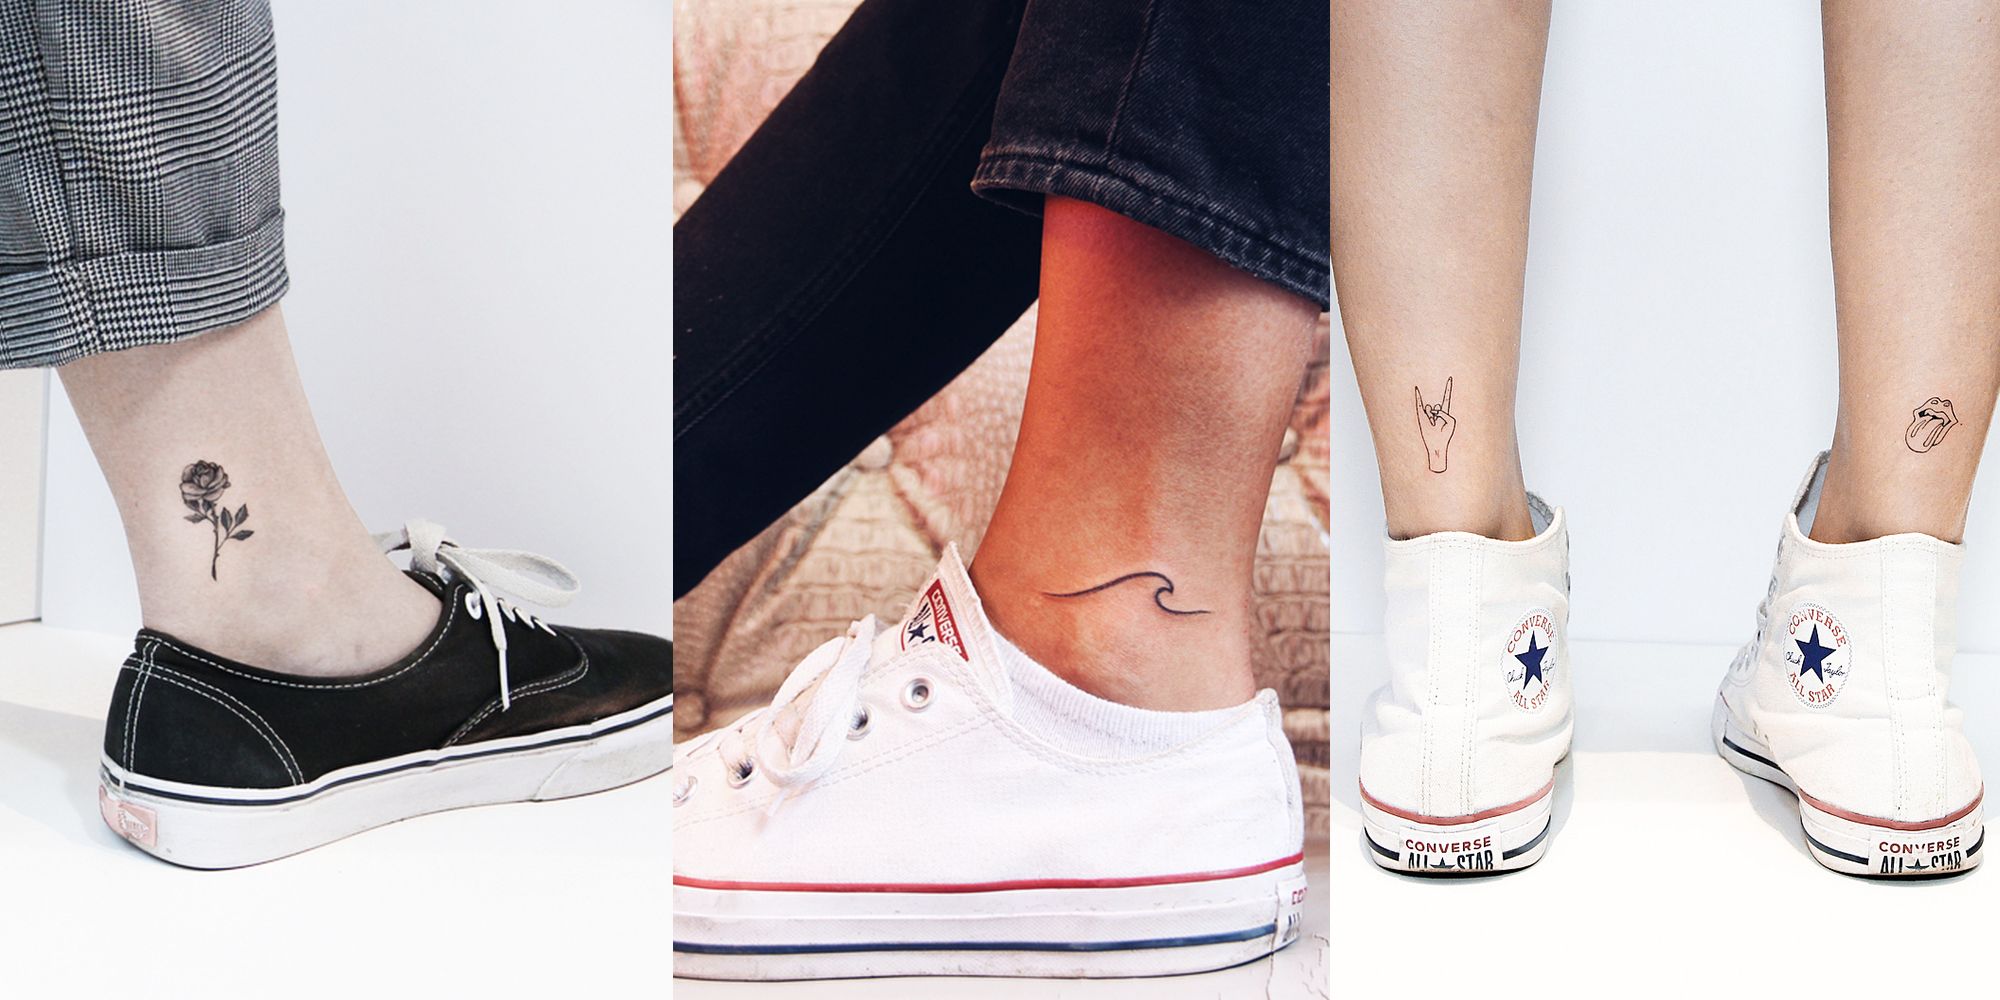 50 Ankle tattoos Ideas Best Designs  Canadian Tattoos